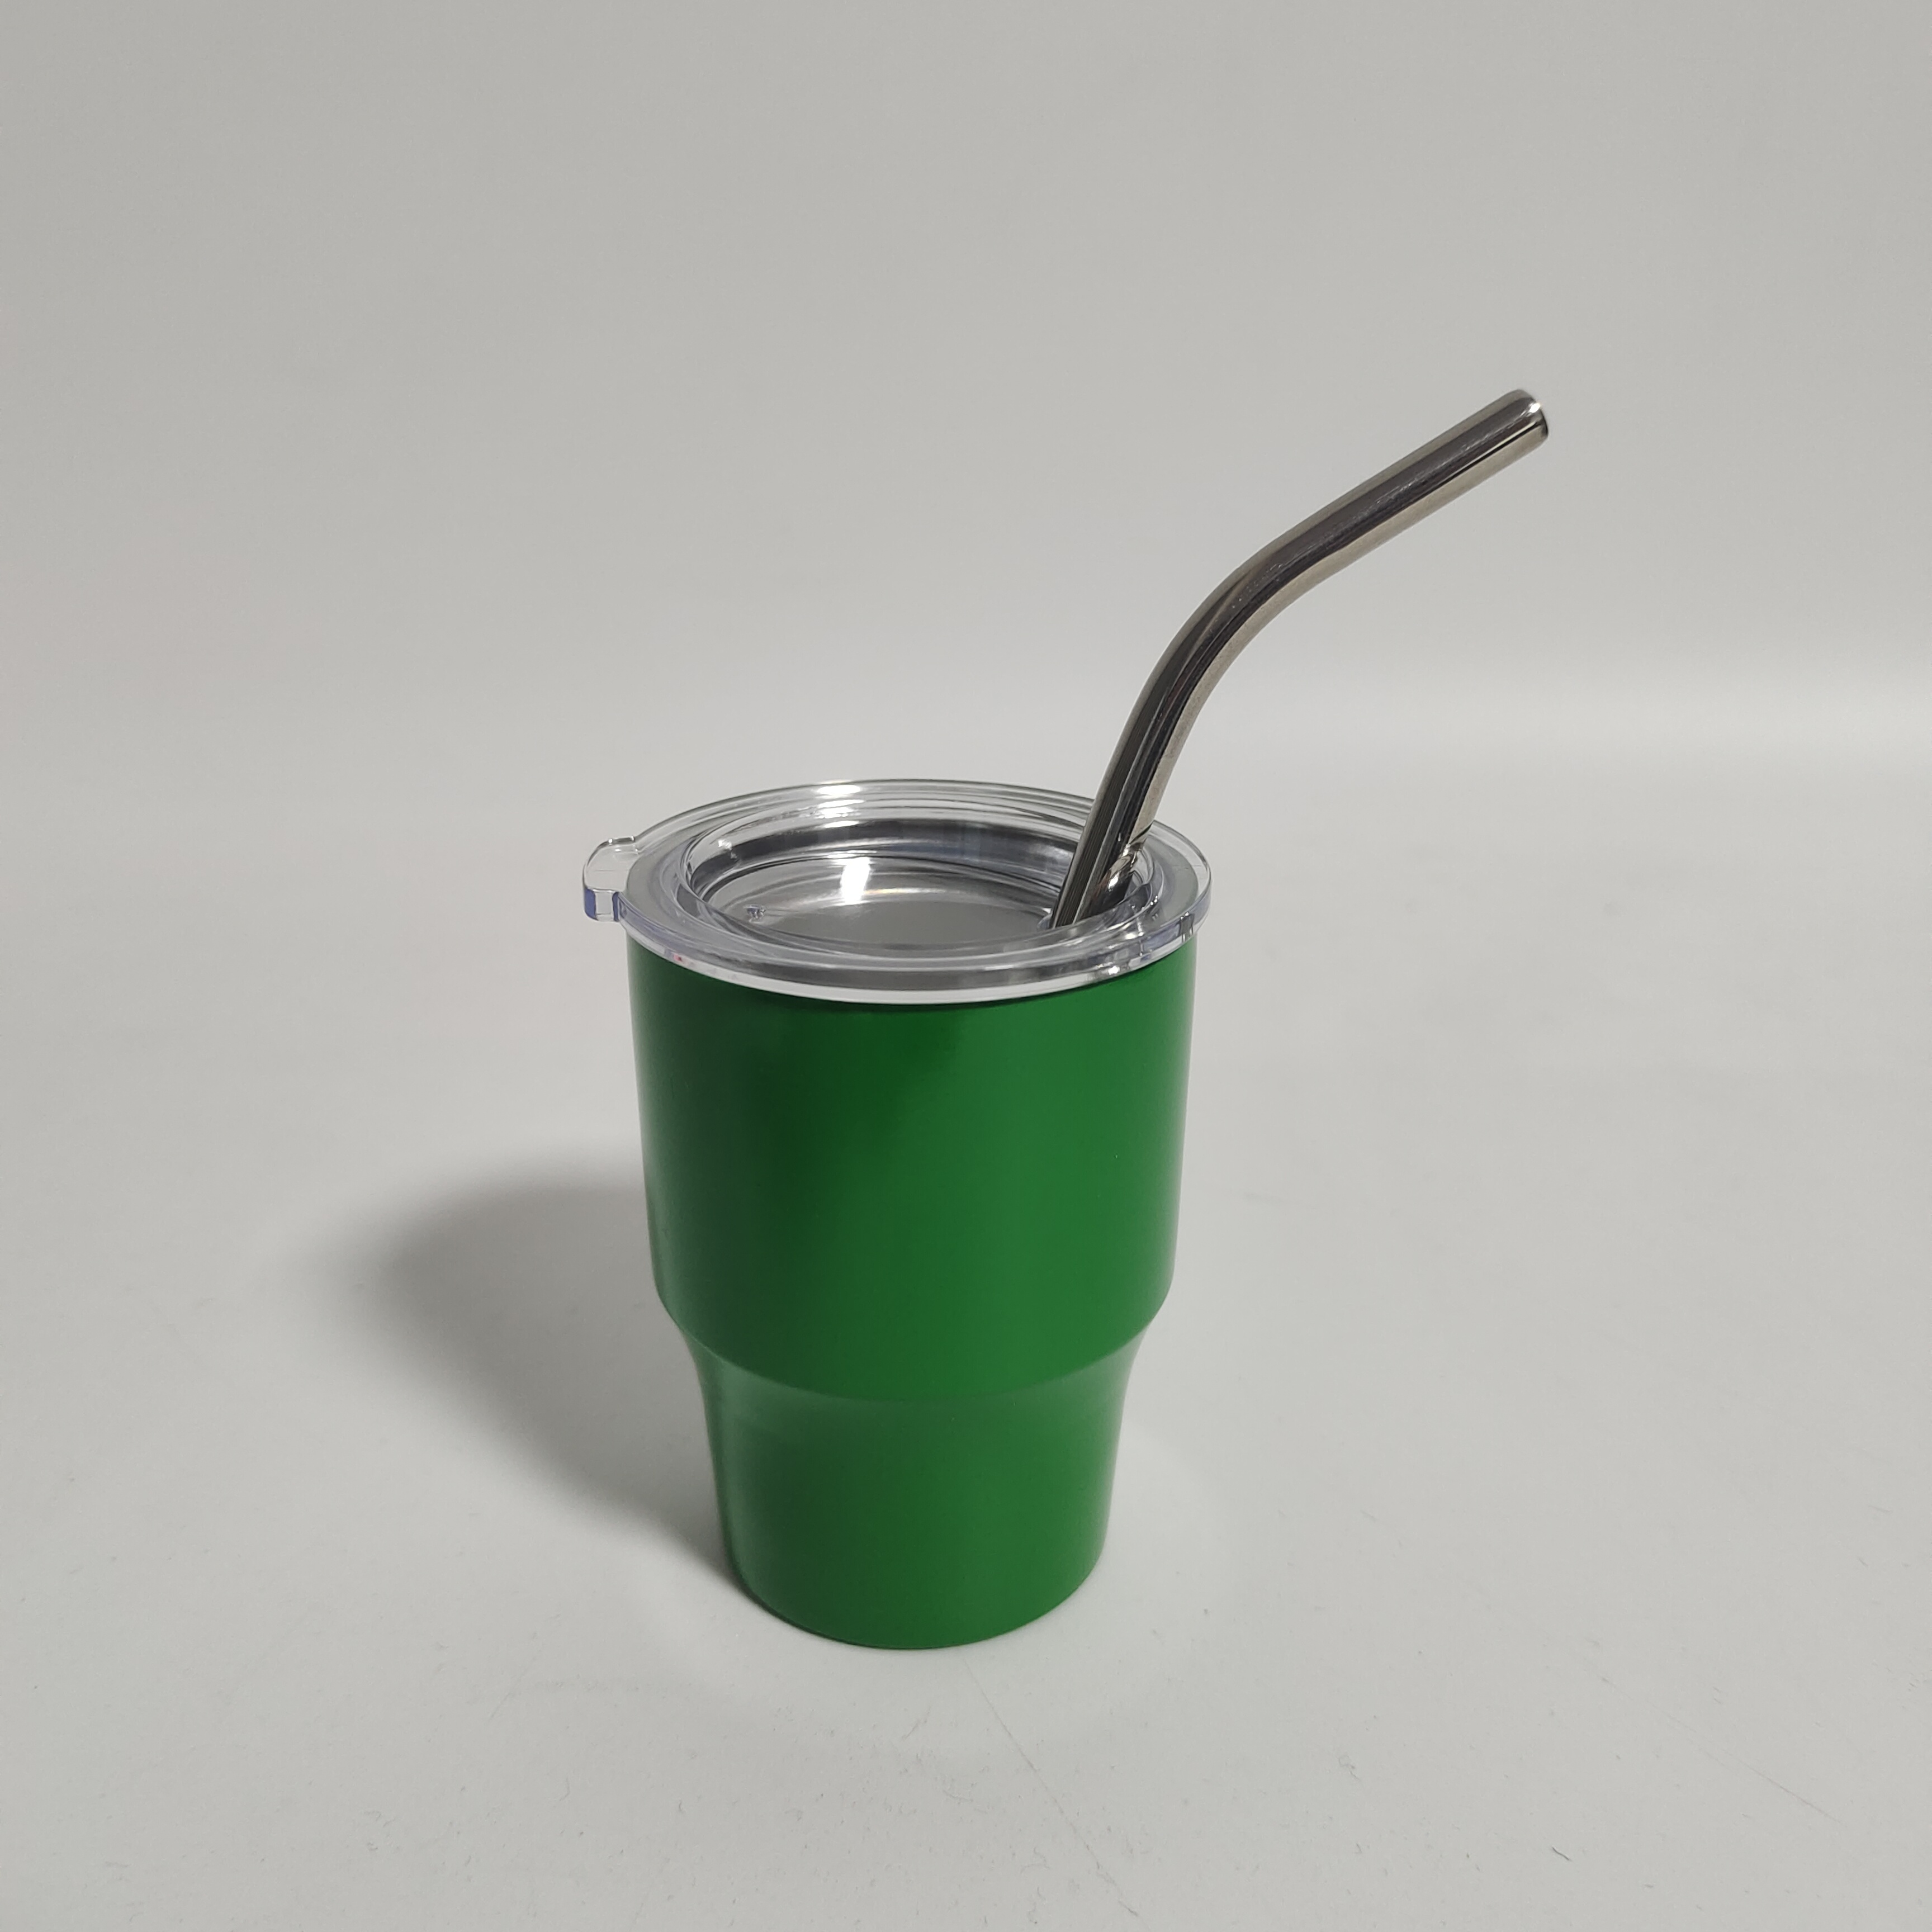 Stainless Steel Cups 400ml Kids & Toddler Smoothie Cups with